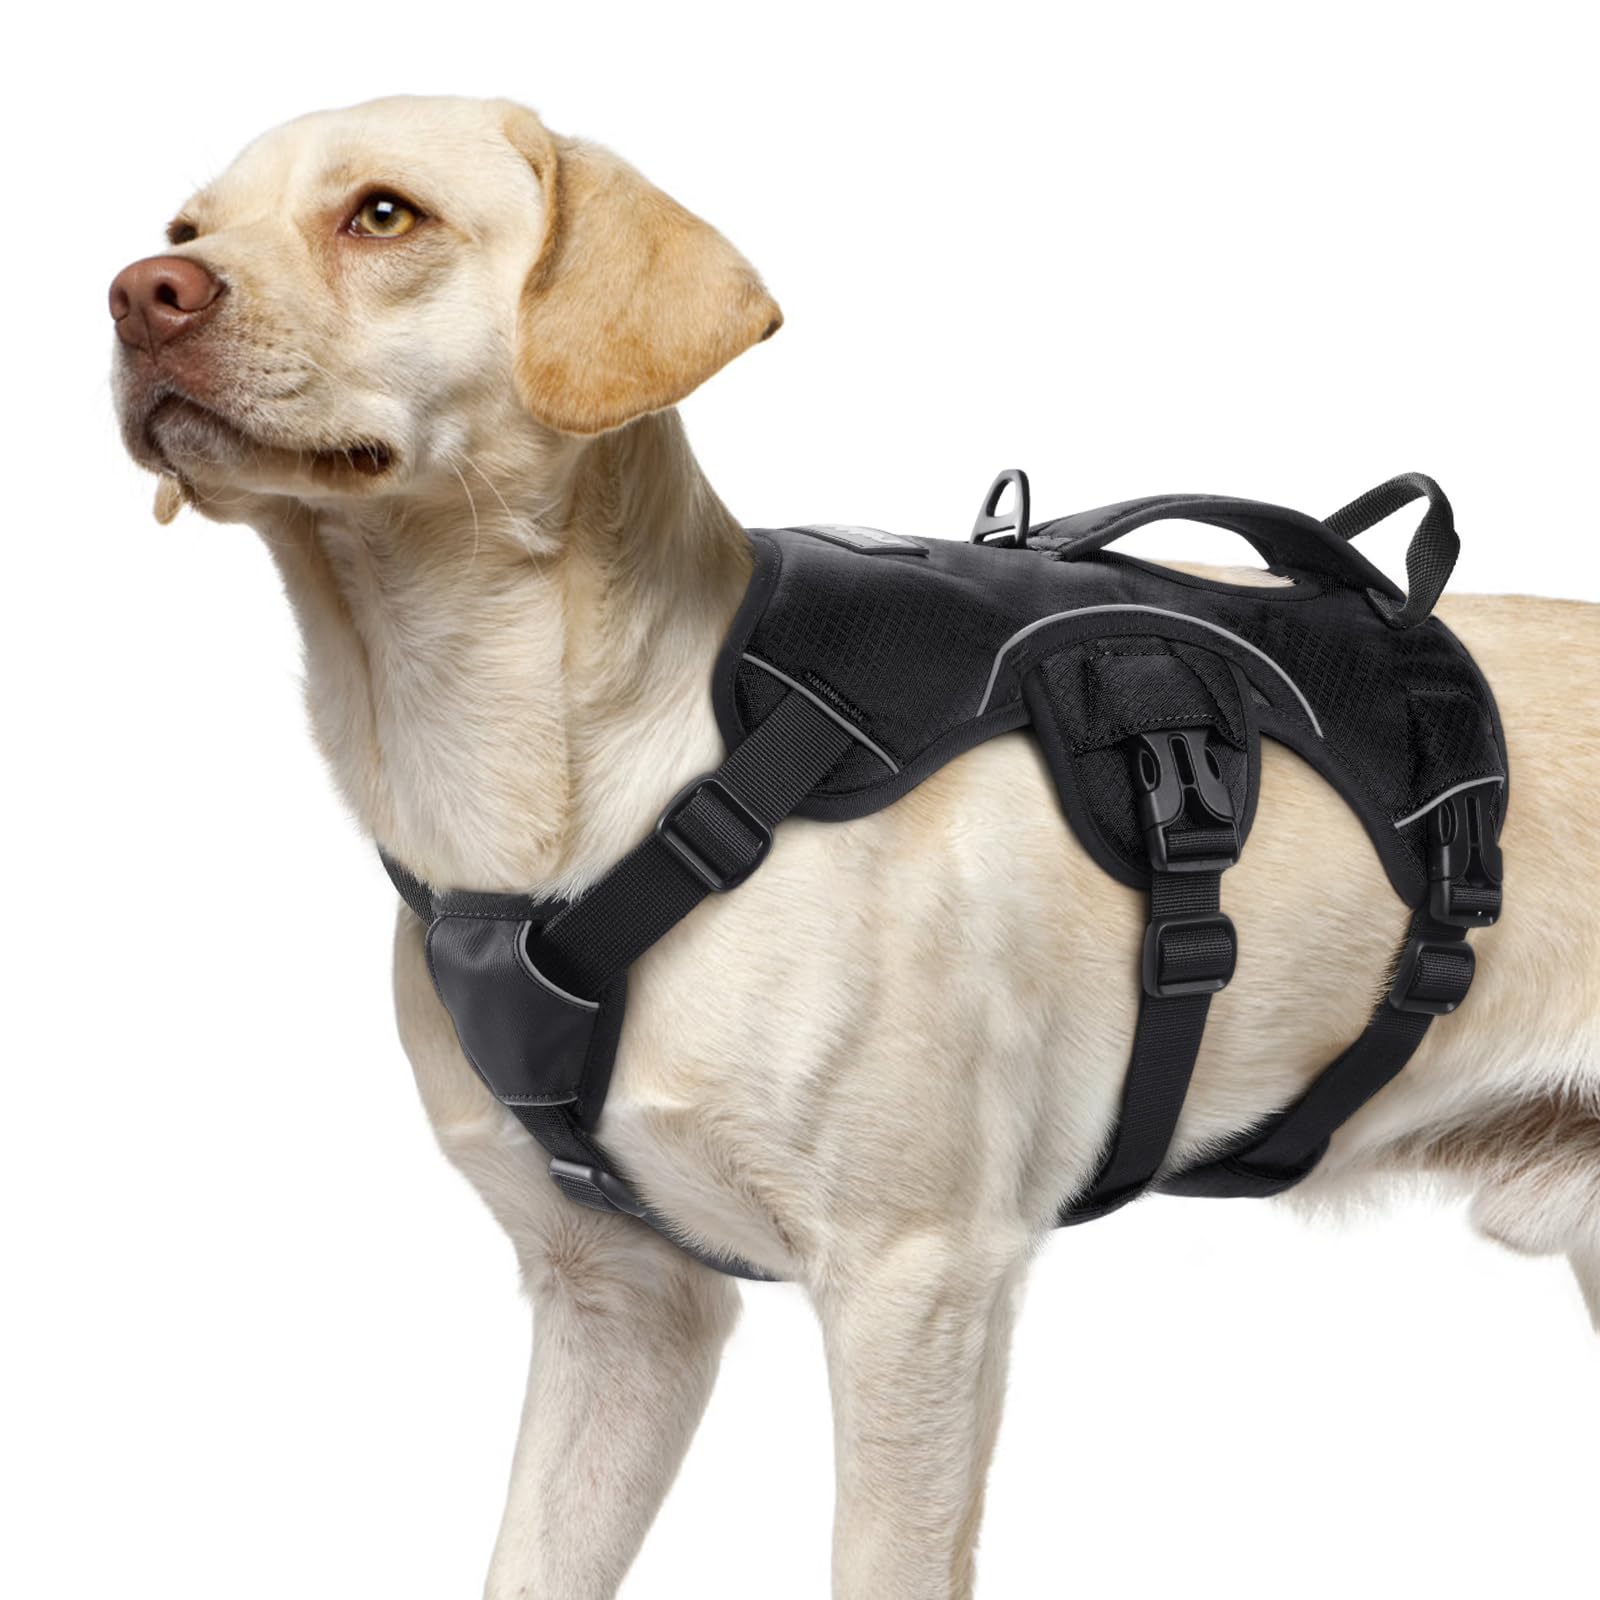 Best Escape Proof Dog Harness